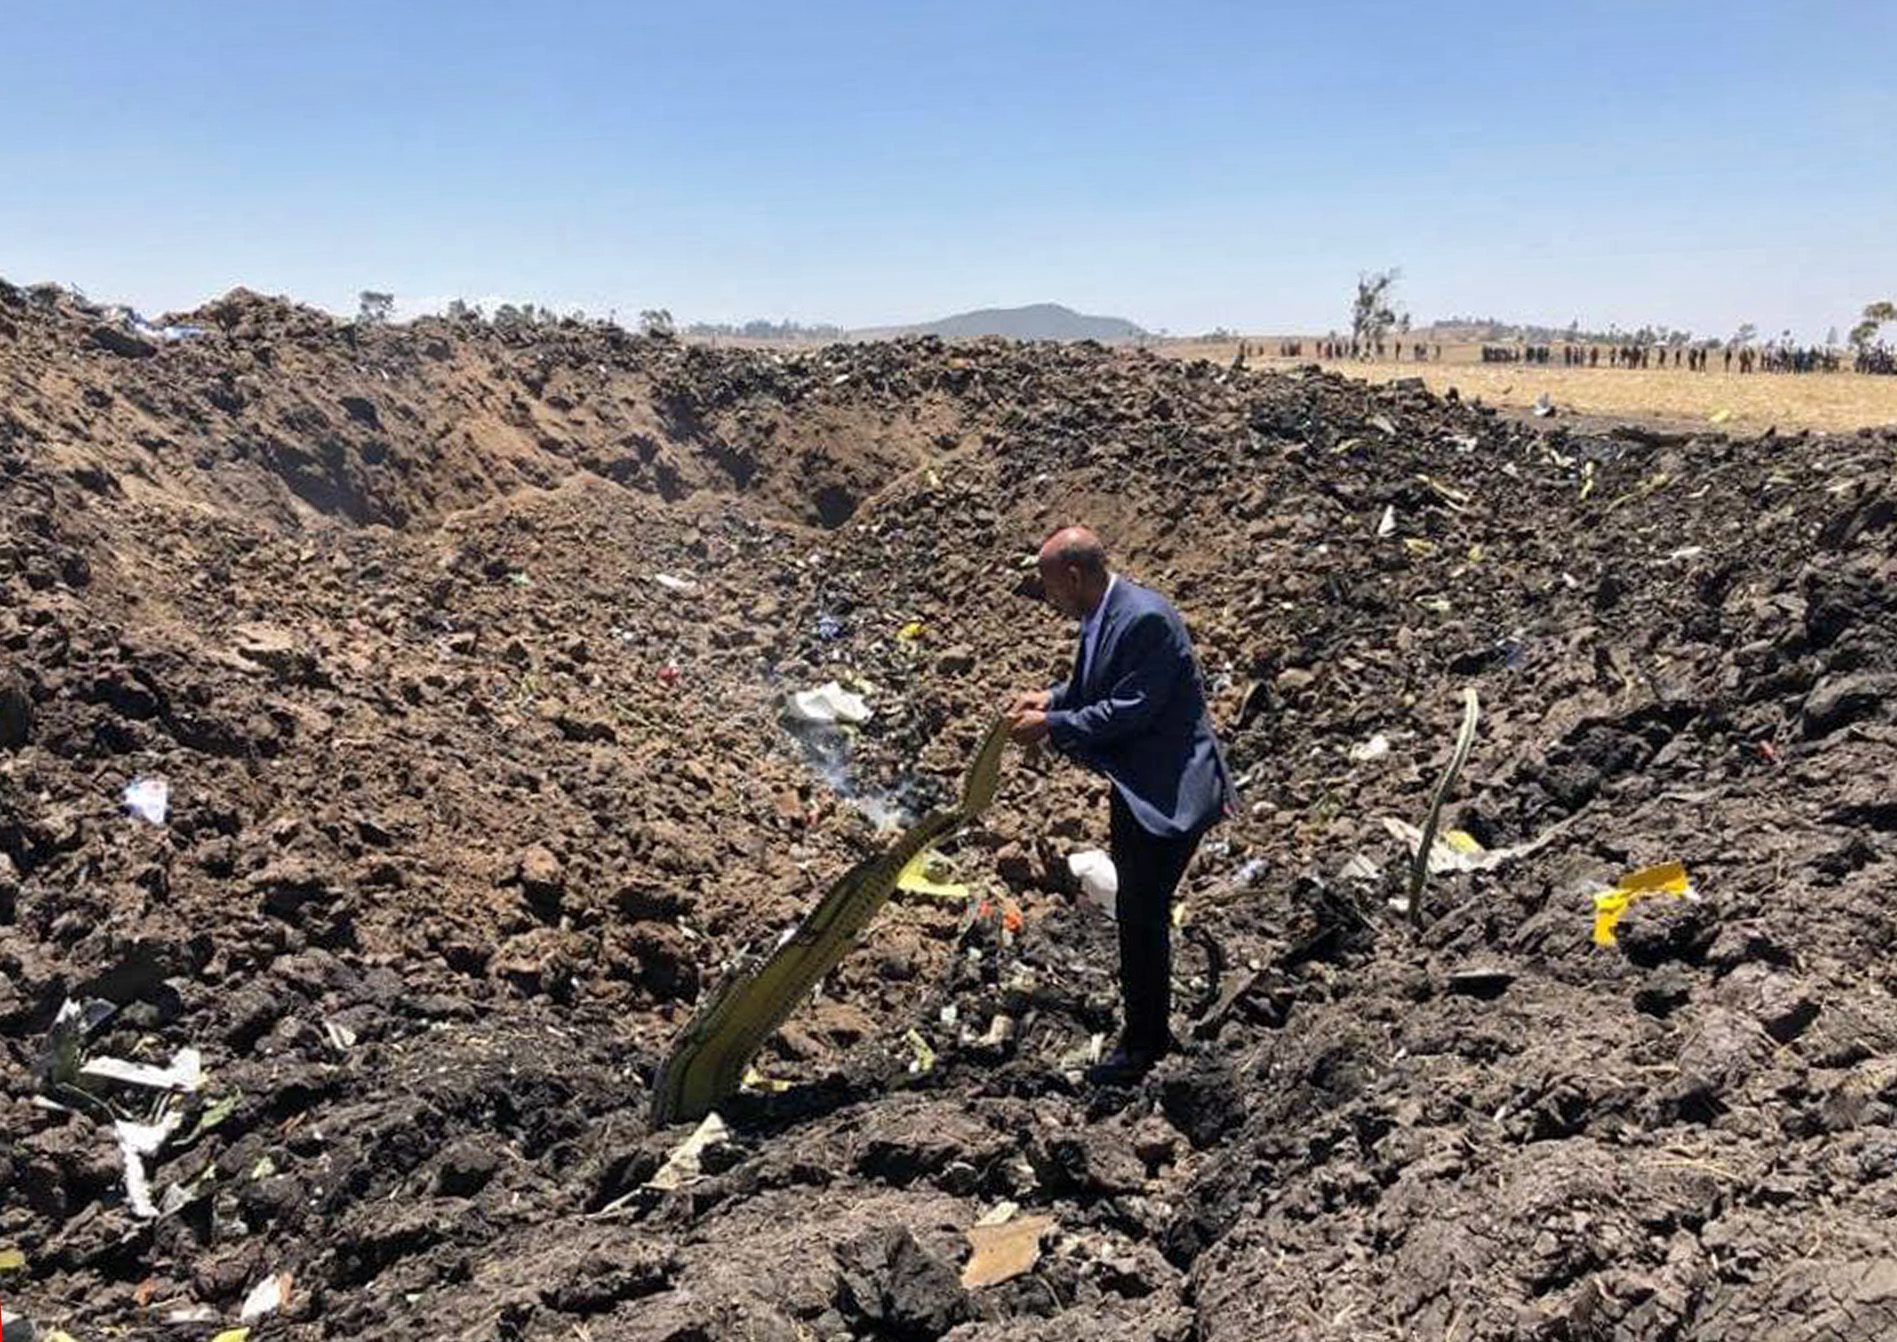 epa07426966 A handout photo made available by Ethiopia Airlines shows the Ethiopian carrier's CEO Tewolde GebreMariam posing among debris at the crash site of Ethiopian Airlines Boeing 737 Max 8 en route to Nairobi, Kenya, crashed near Bishoftu, Ethiopia, 10 March 2019. All passengers onboard the scheduled flight ET 302 carrying 149 passengers and 8 crew members, have died, the airlines says.  EPA/Ethiopia Airlines / HANDOUT  HANDOUT EDITORIAL USE ONLY/NO SALES ETHIOPIA KENYA PLANE CRASH